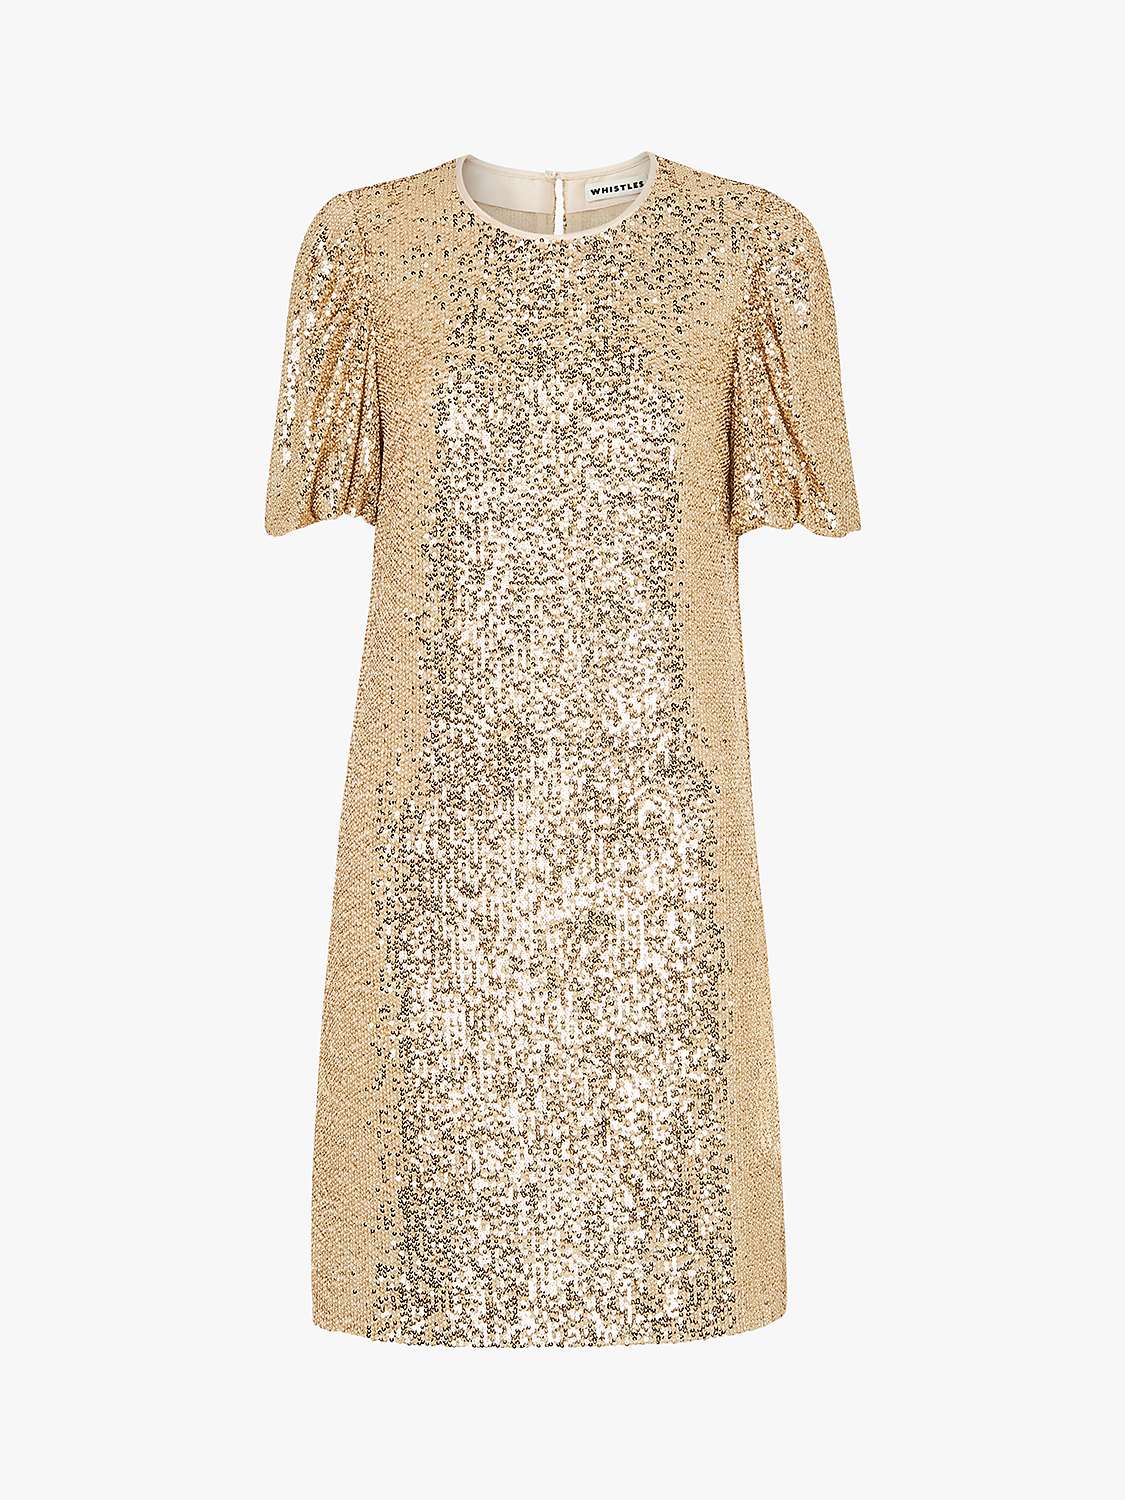 Whistles Sequin Shift Dress, Champagne ...